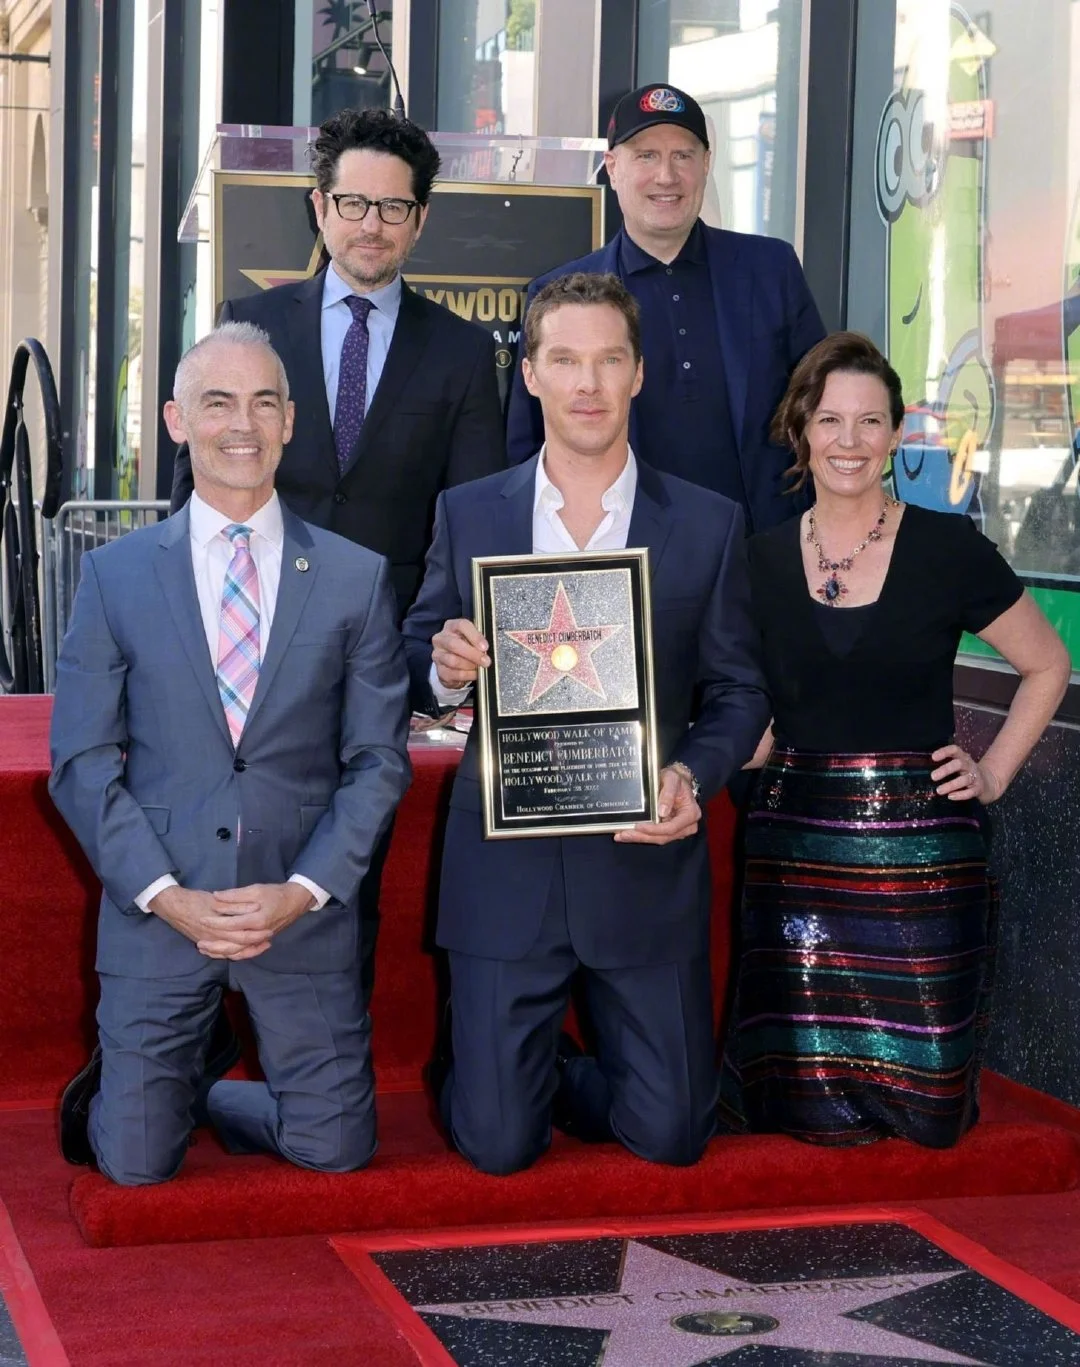 benedict-cumberbatch-leaves-a-star-that-belongs-to-him-at-walk-of-fame-6